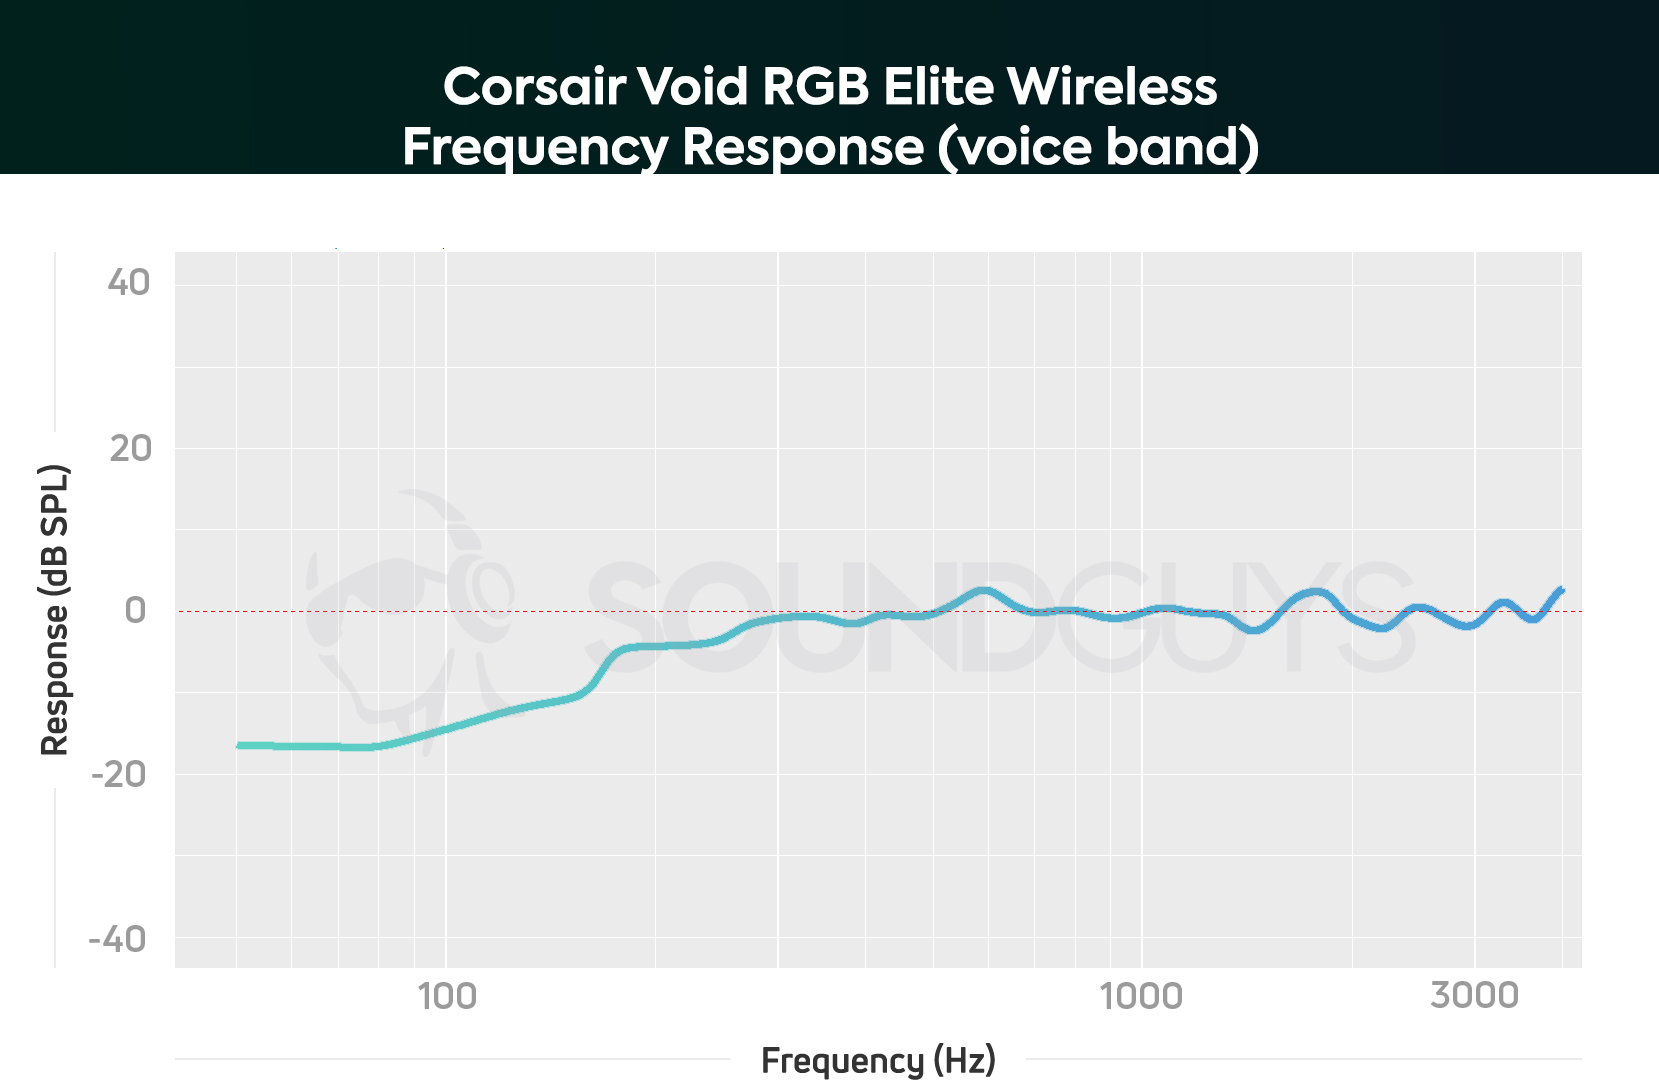 A frequency response chart for the Corsair Void RGB Elite Wireless gaming headset microphone